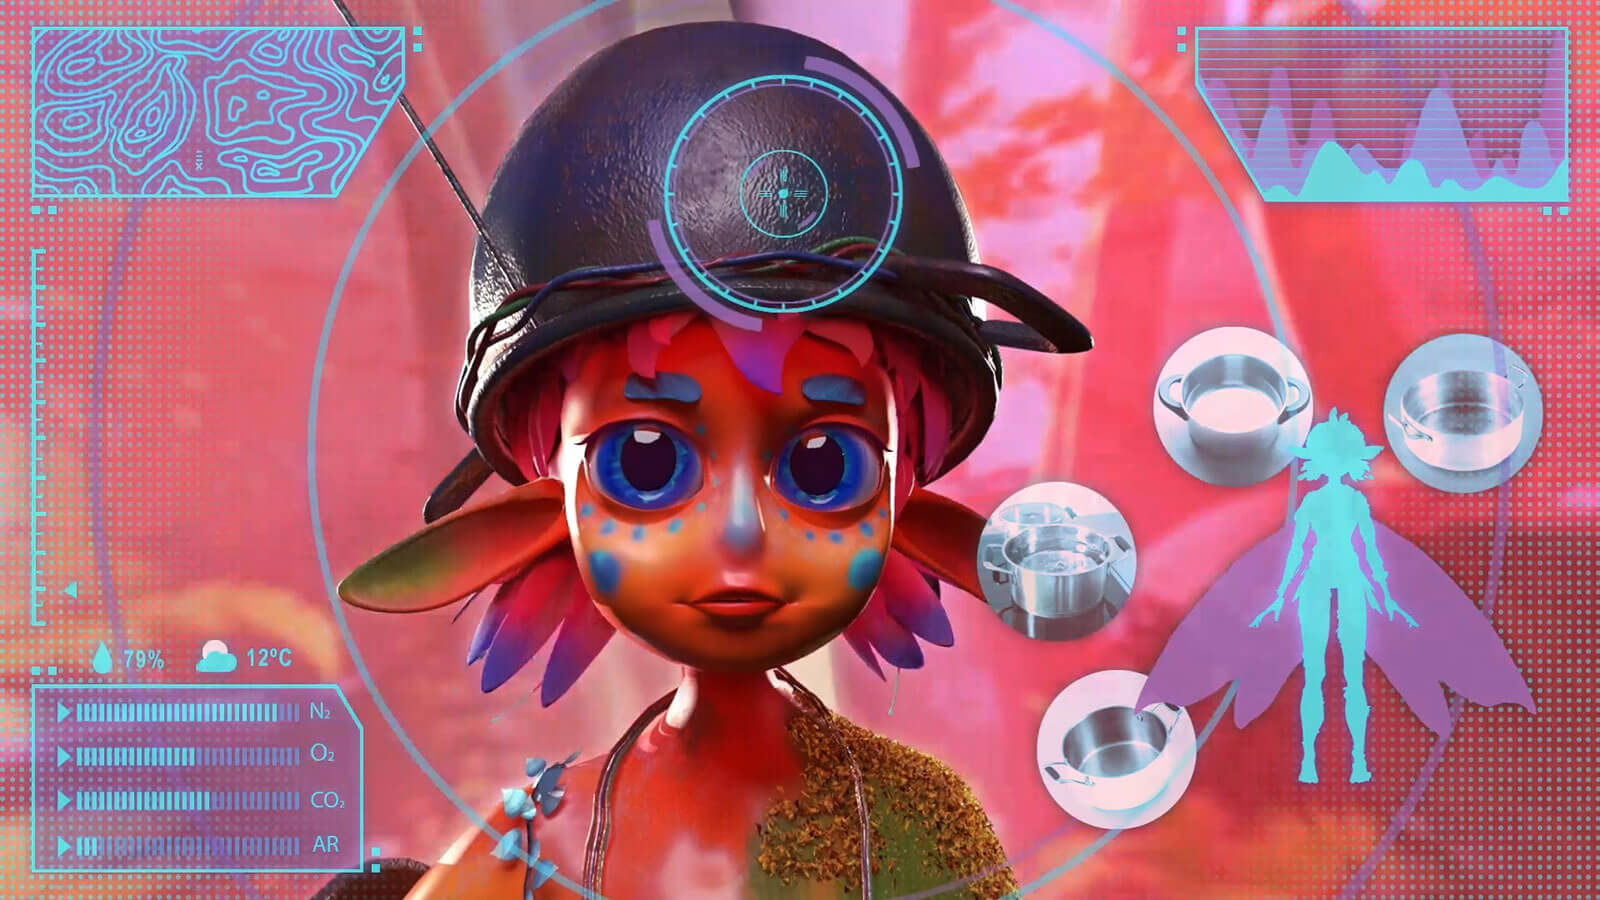 A HUD view of a young girl wearing a helmet with various blue overlays 